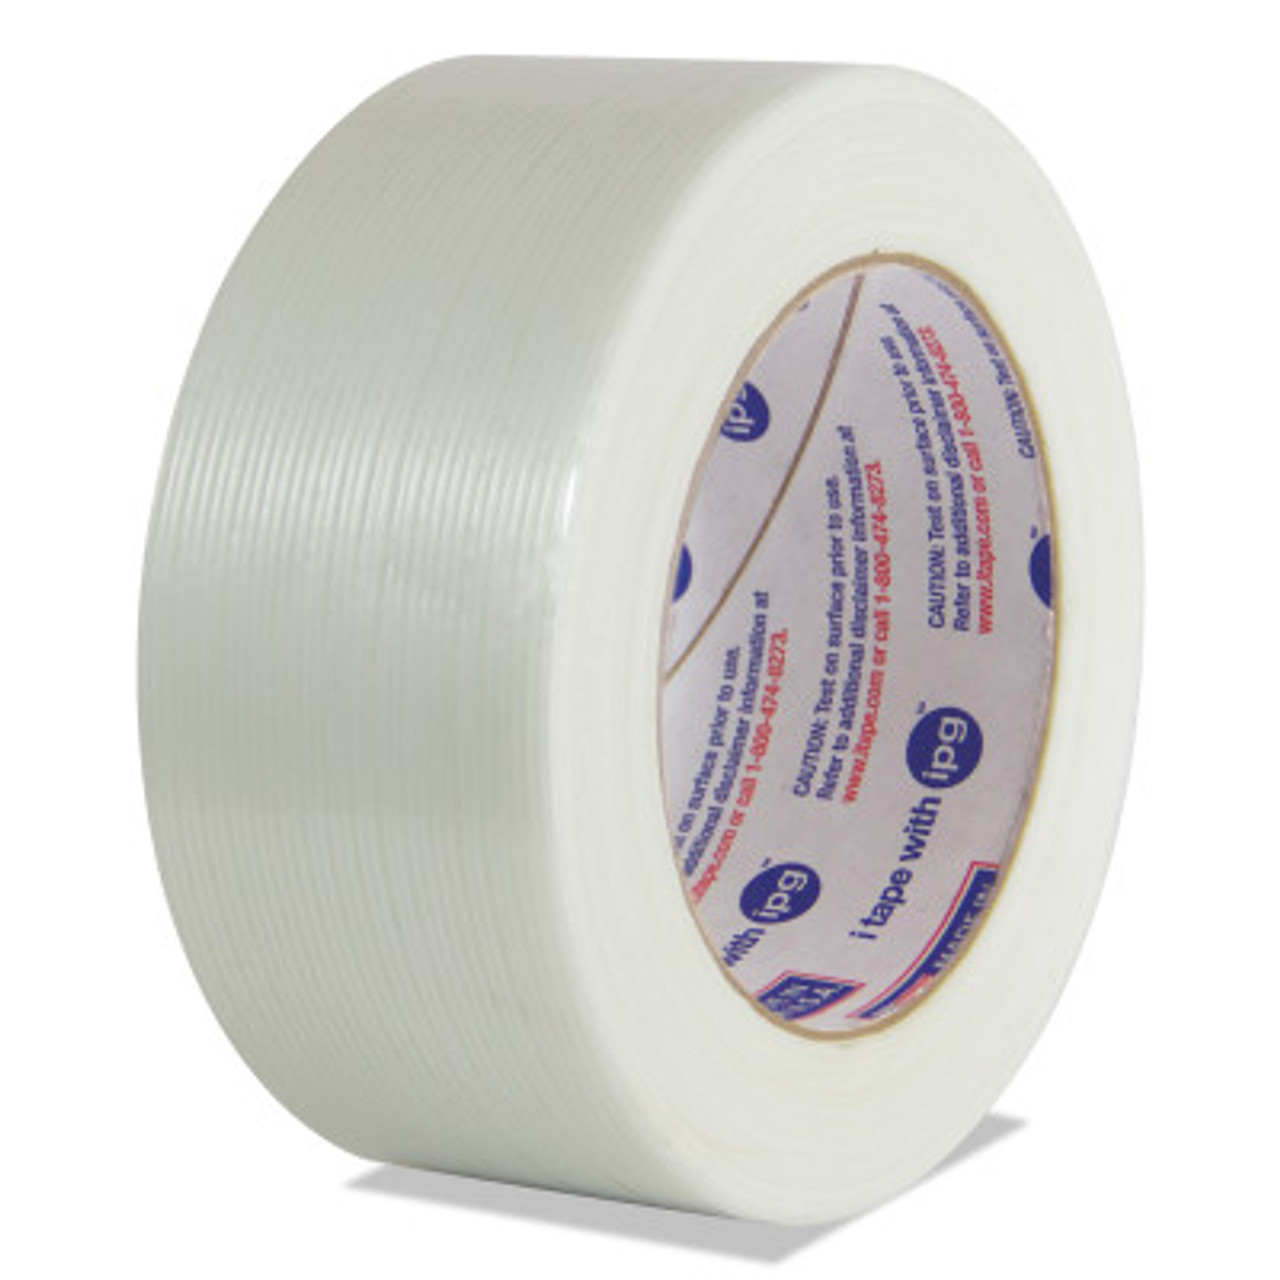 Intertape RG300 Utility Grade Filament Strapping Tape White x 60 yds. 3/8 in 